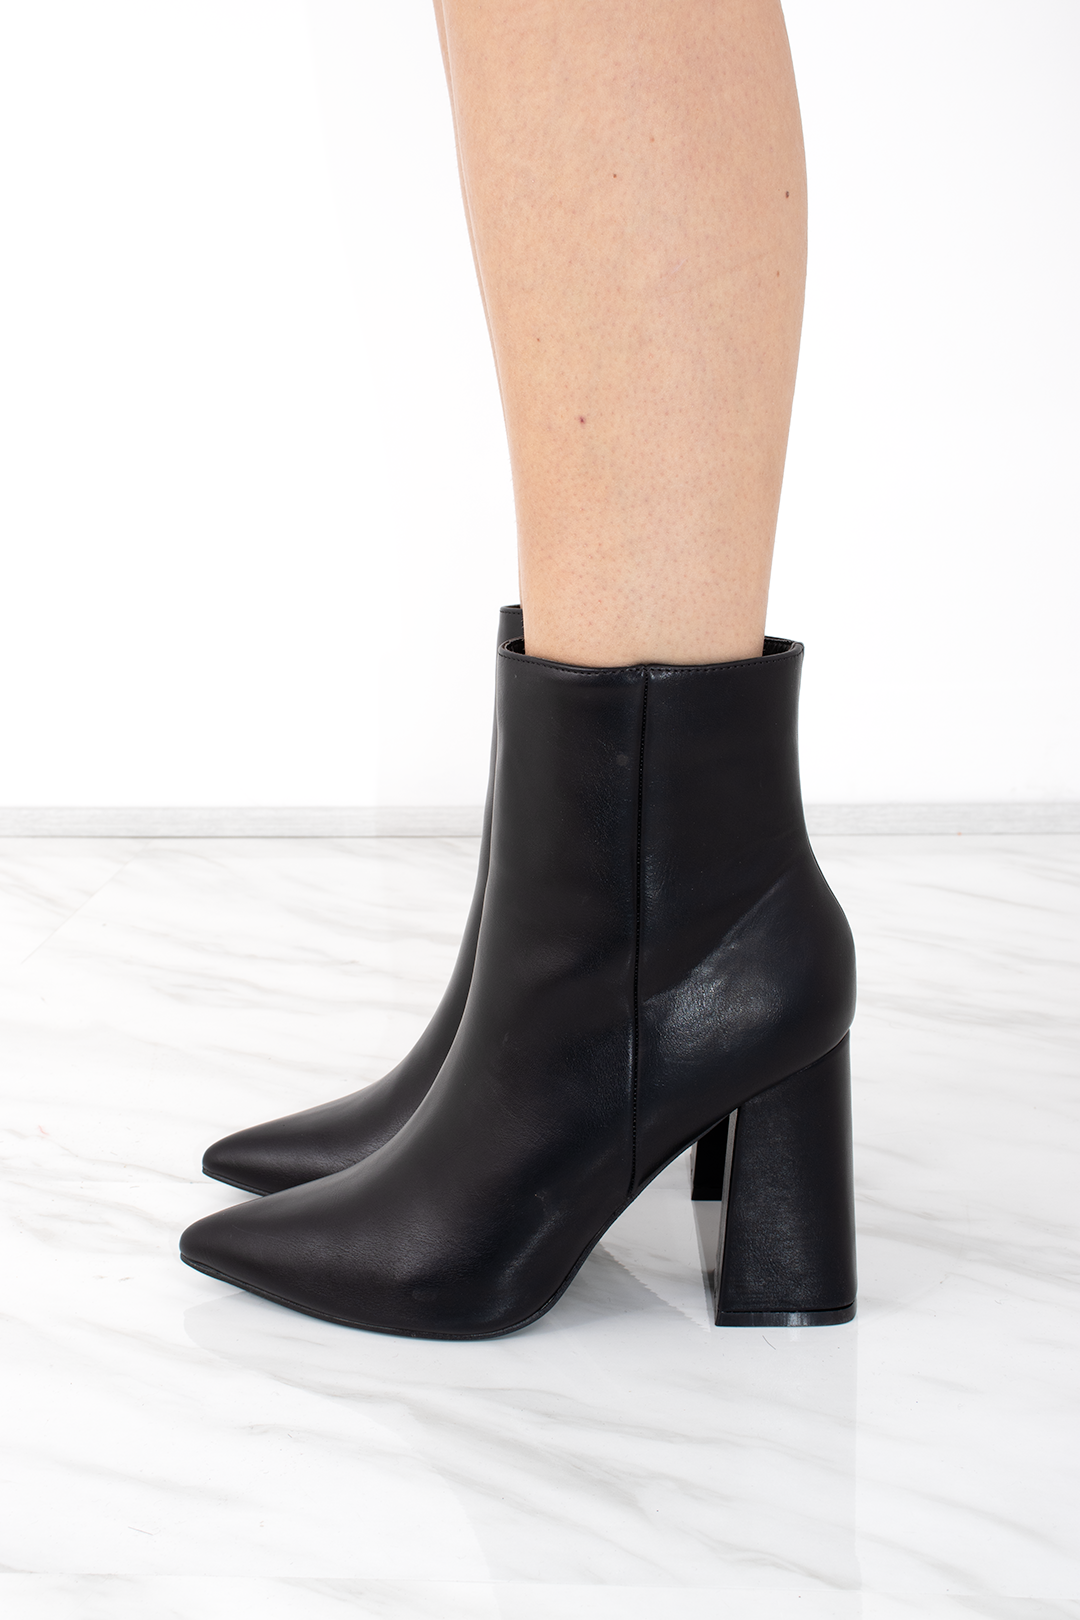 Black Pointed Toe Faux Leather Block Heel Ankle Boot